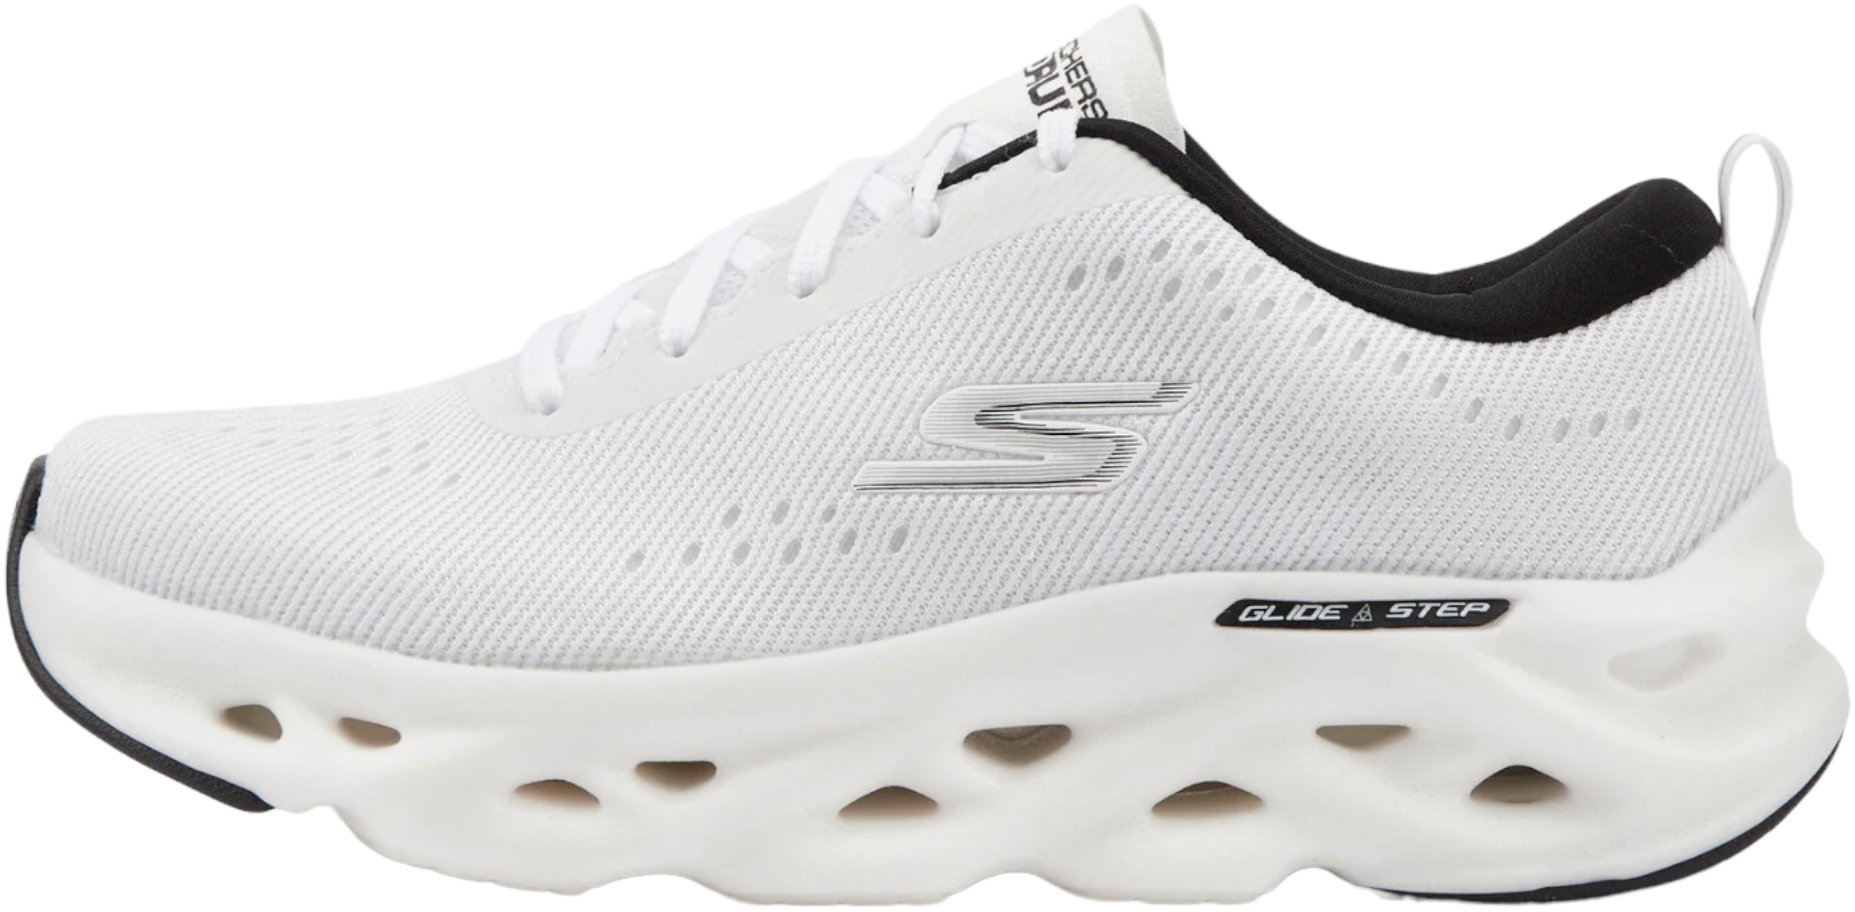 30+ Best Skechers running shoes: Save up to 51%